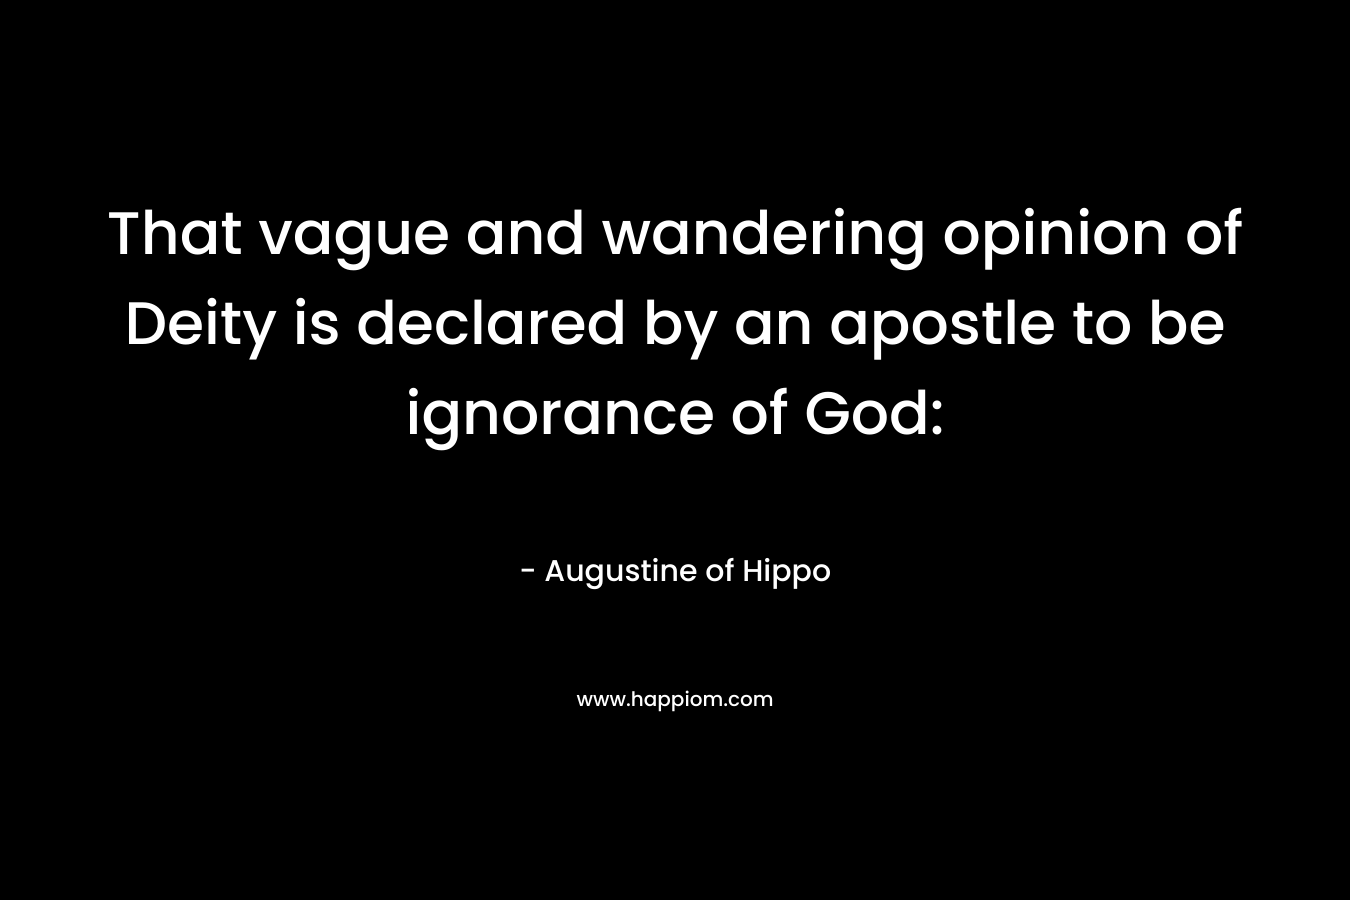 That vague and wandering opinion of Deity is declared by an apostle to be ignorance of God: